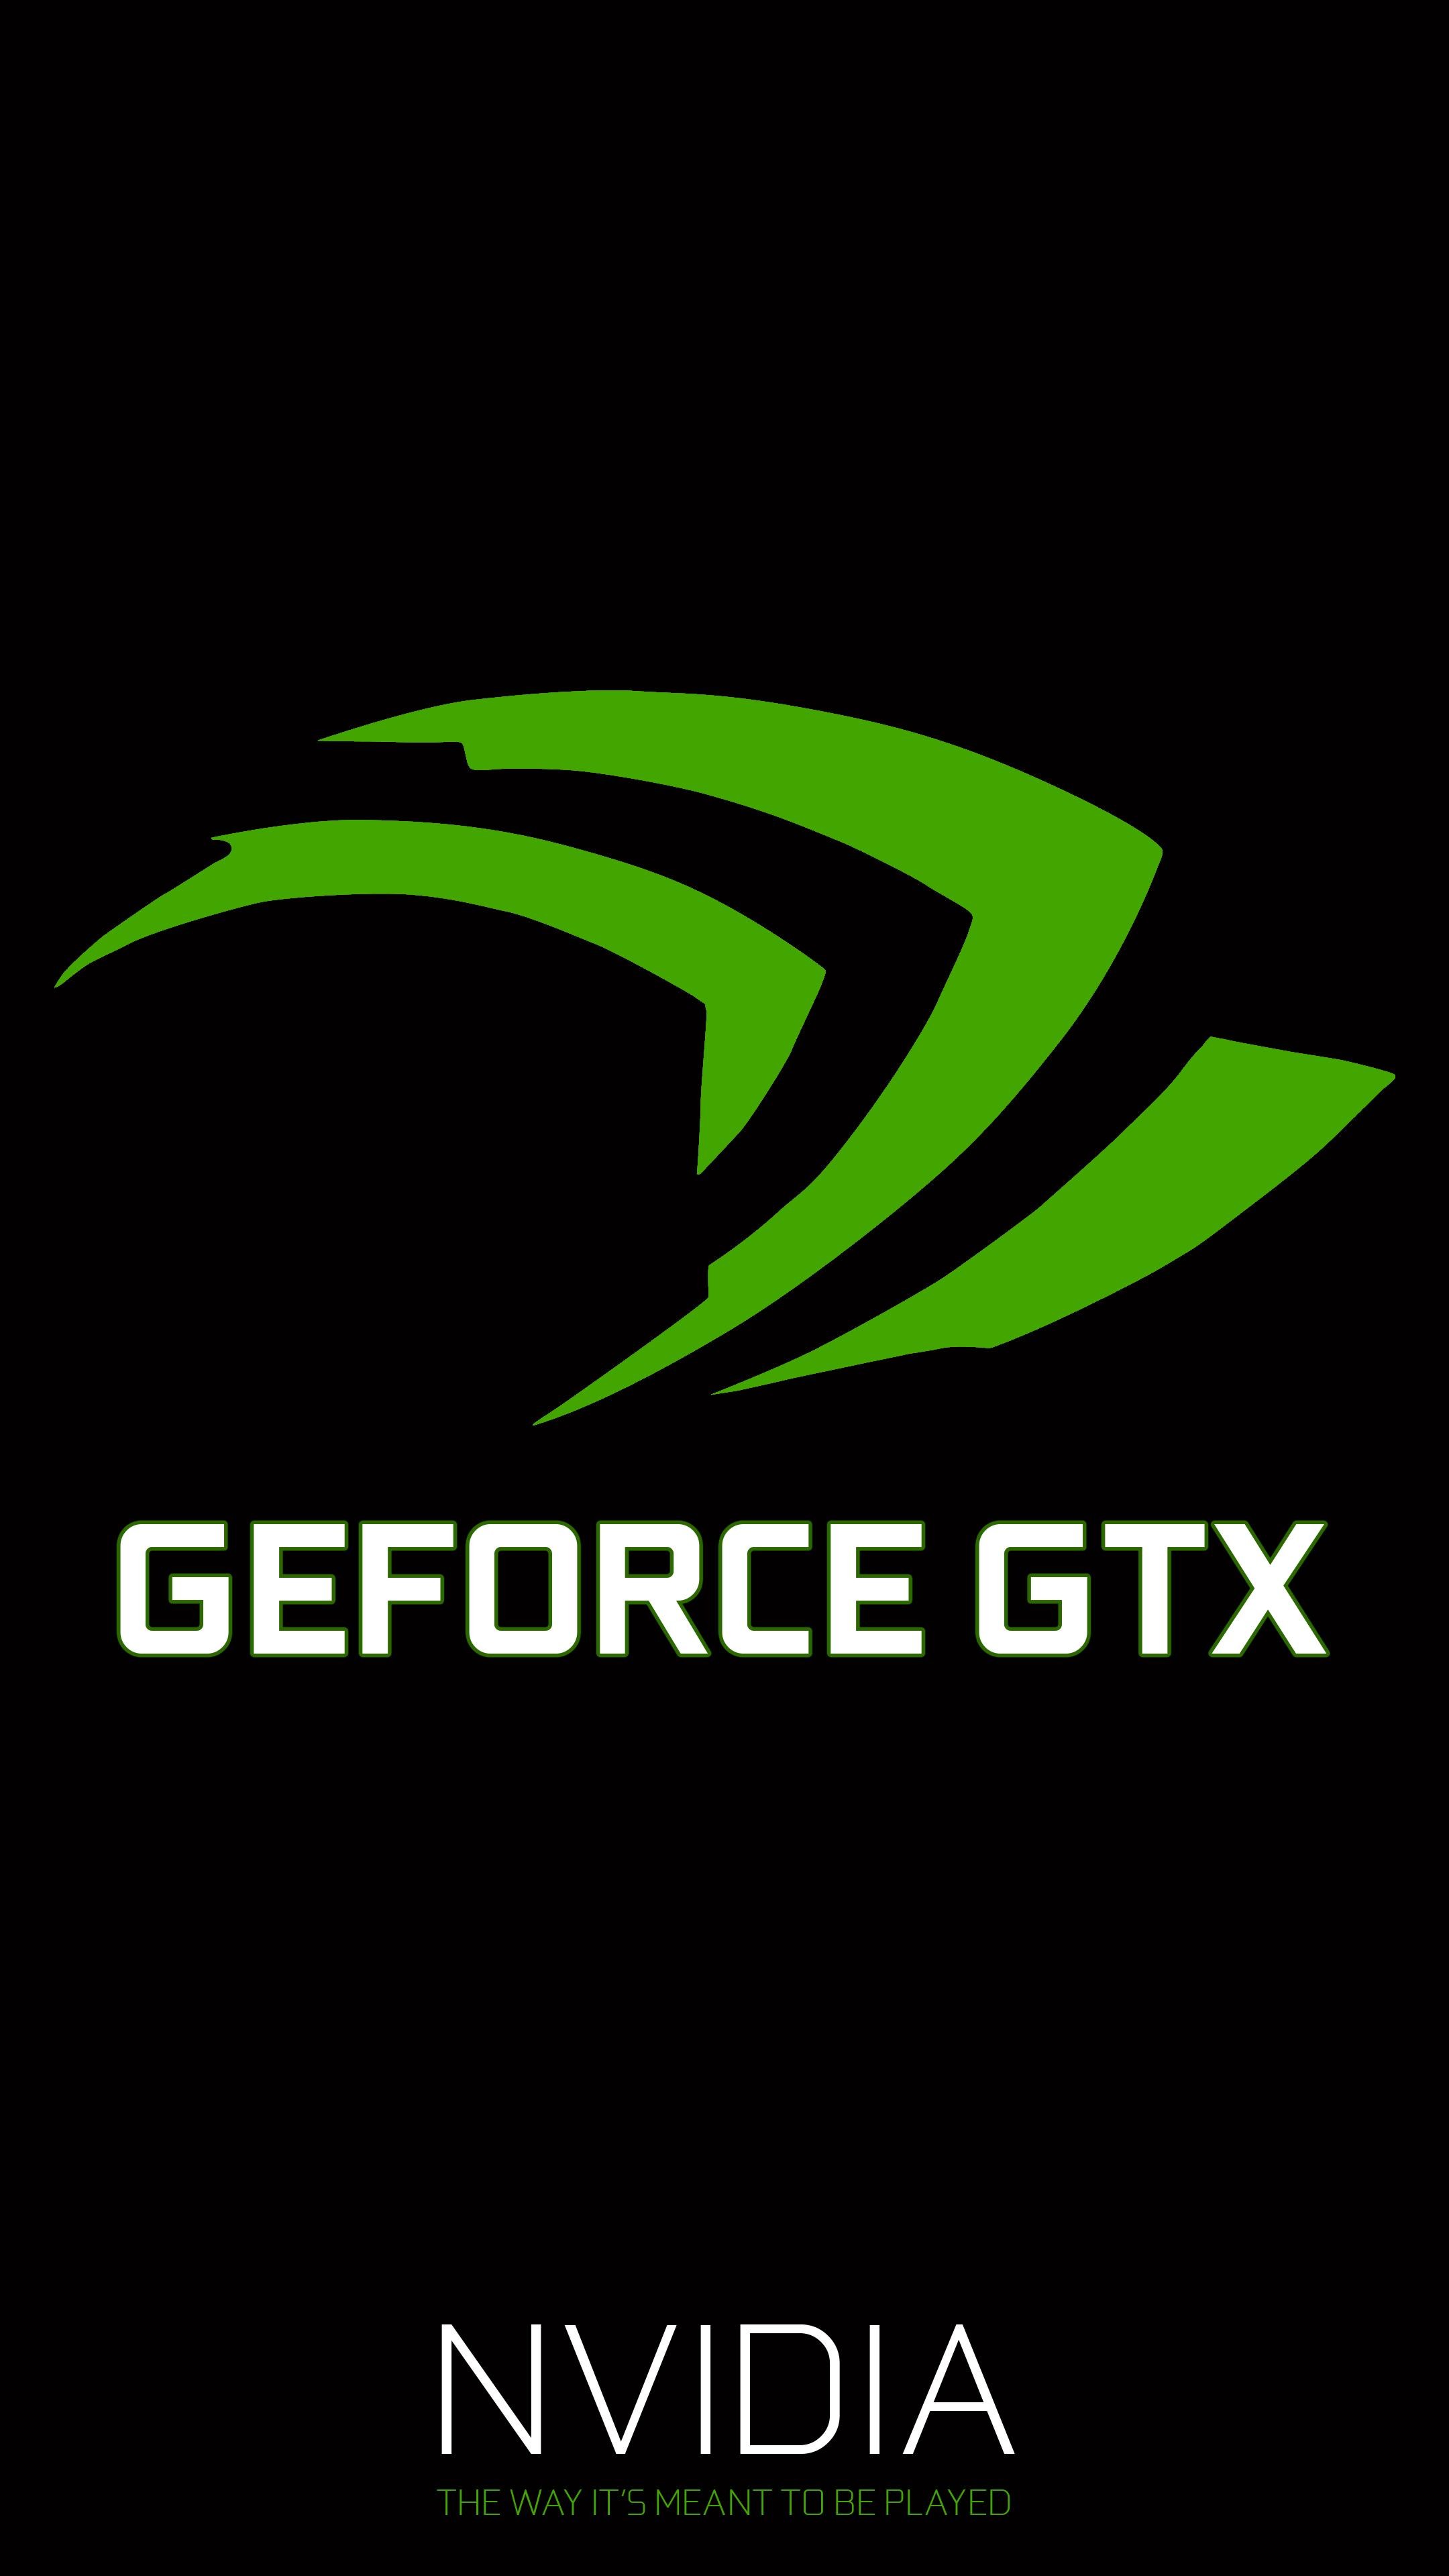 2160x3840 Made a GeForce phone wallpaper if anyone wants it.